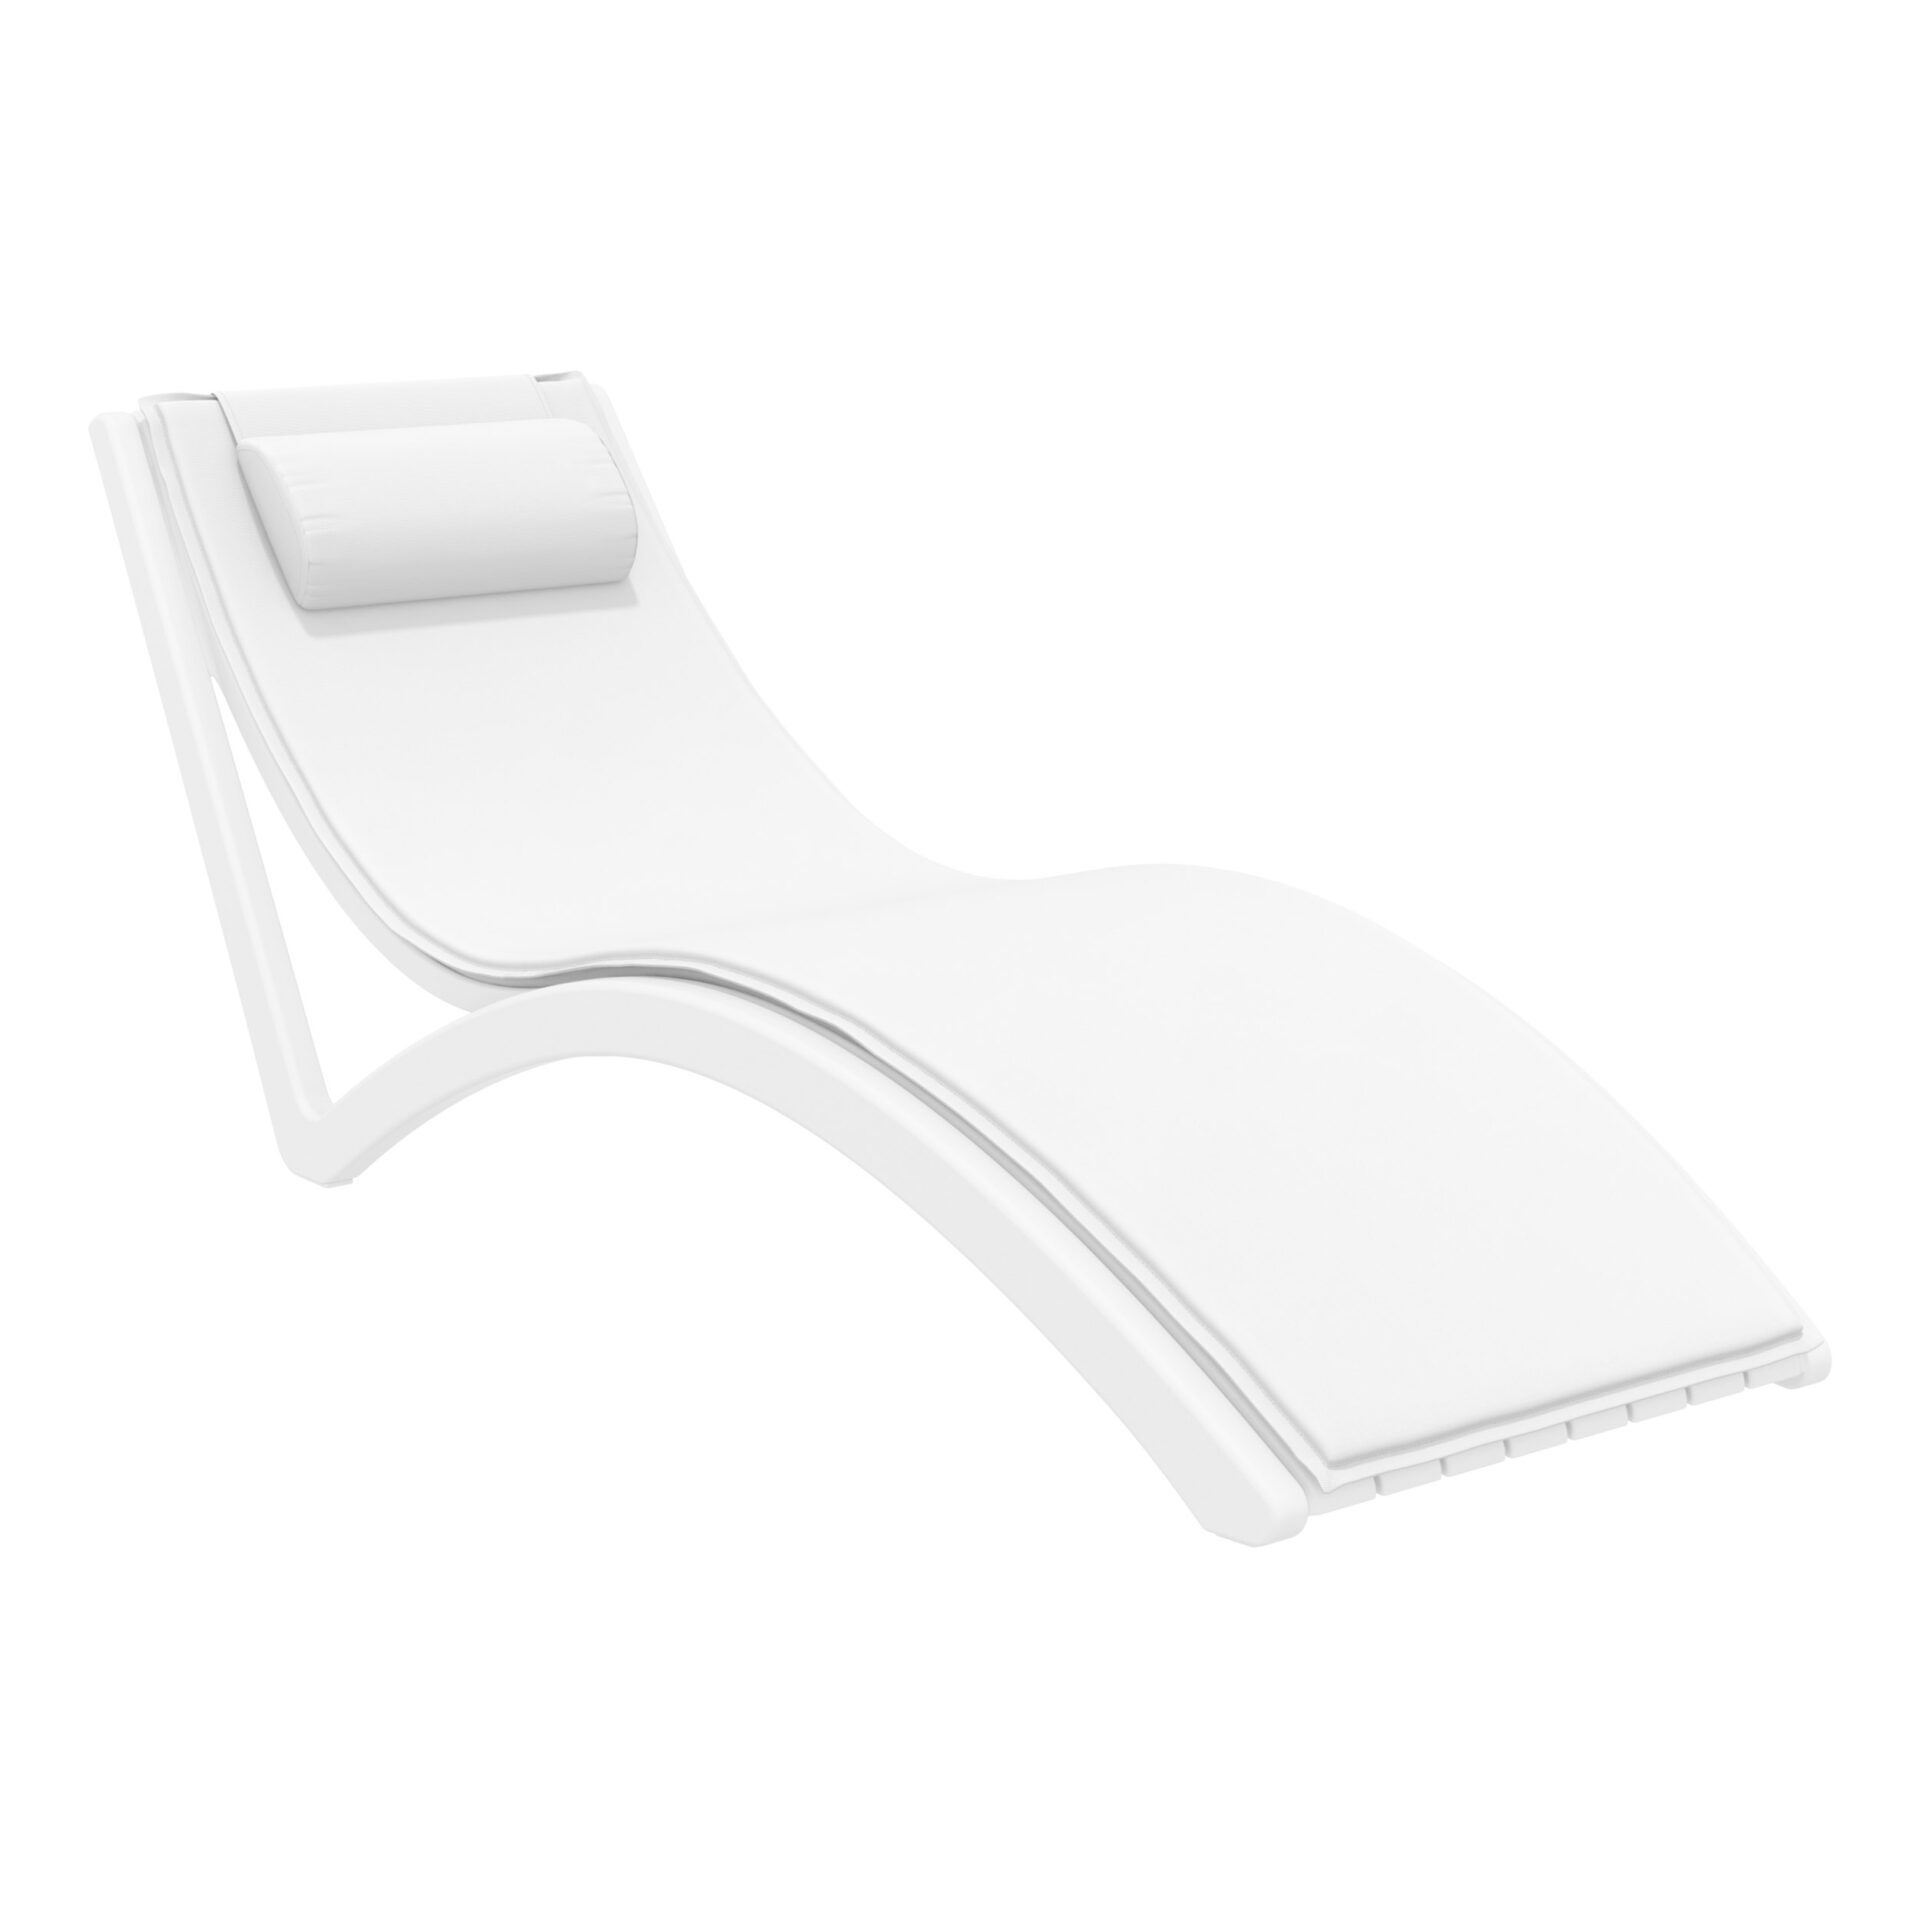 outdoor polypropylene slim sunlounger pillow cushion white white front side